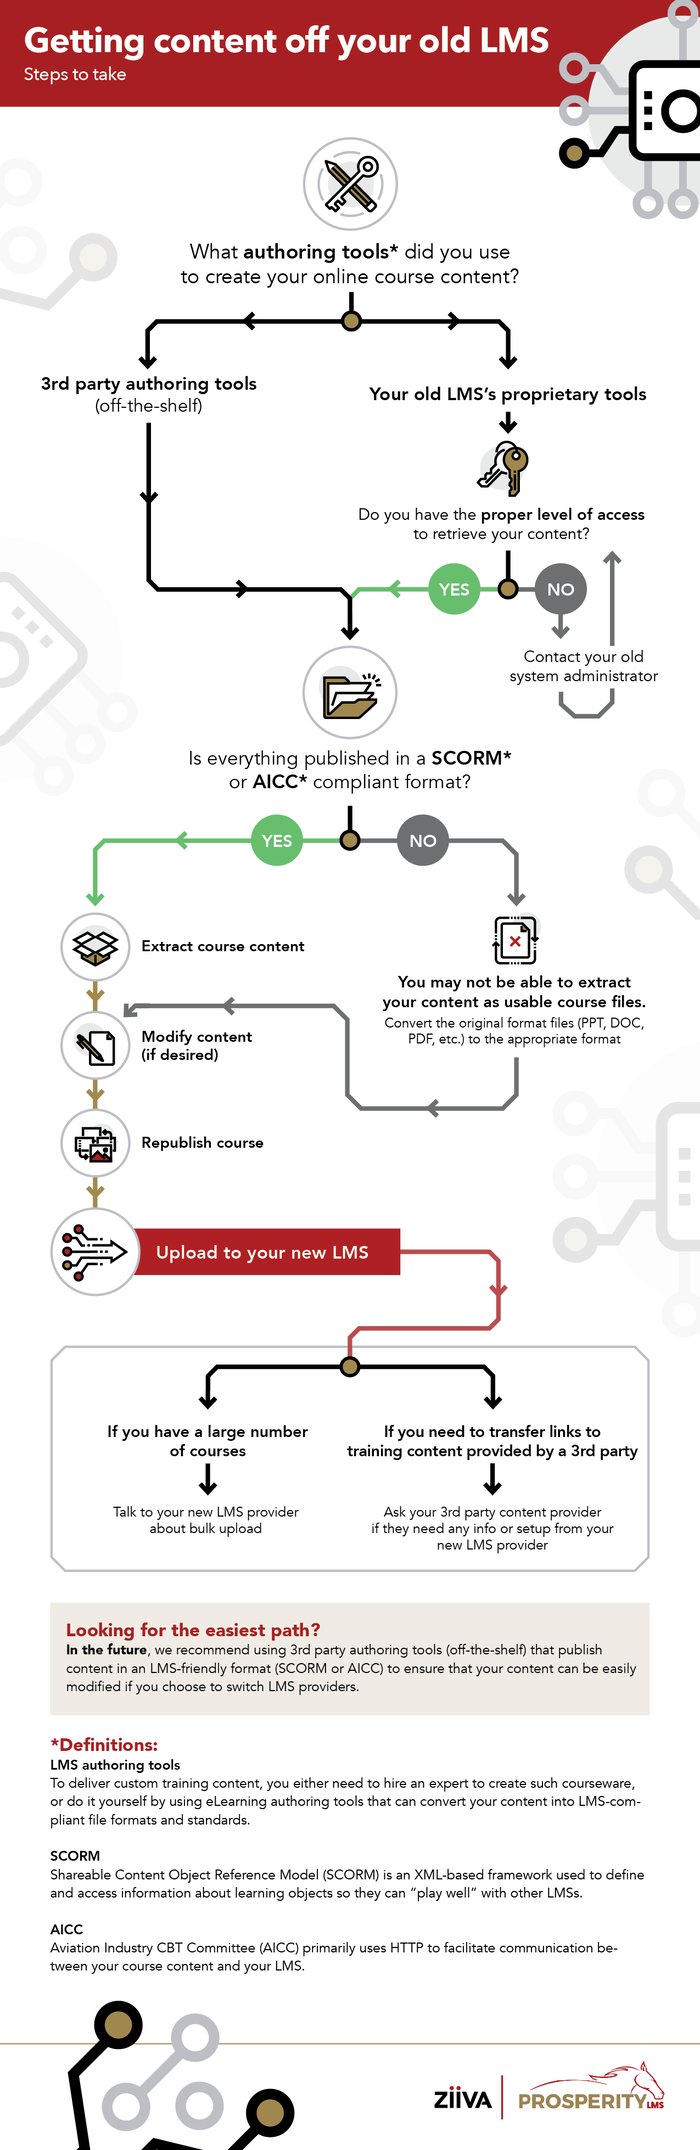 An infographic showing how to get your content off your old LMS.